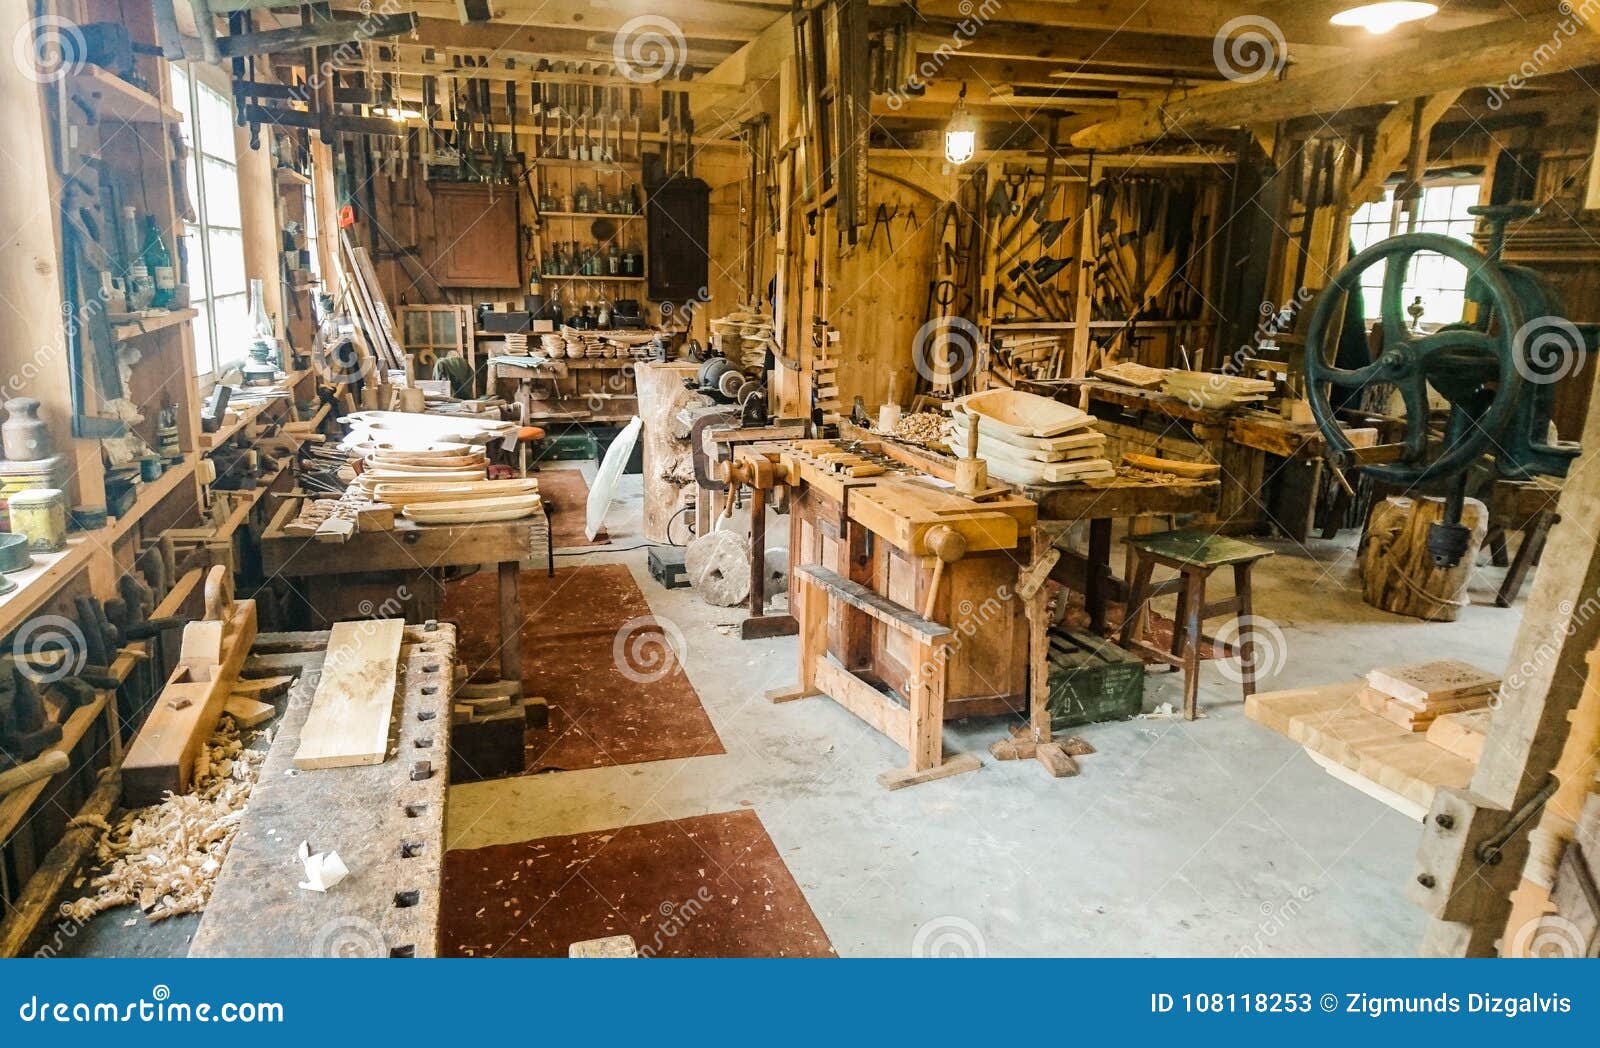 Vintage Carpentry Workshop With Many Tools Stock Image 